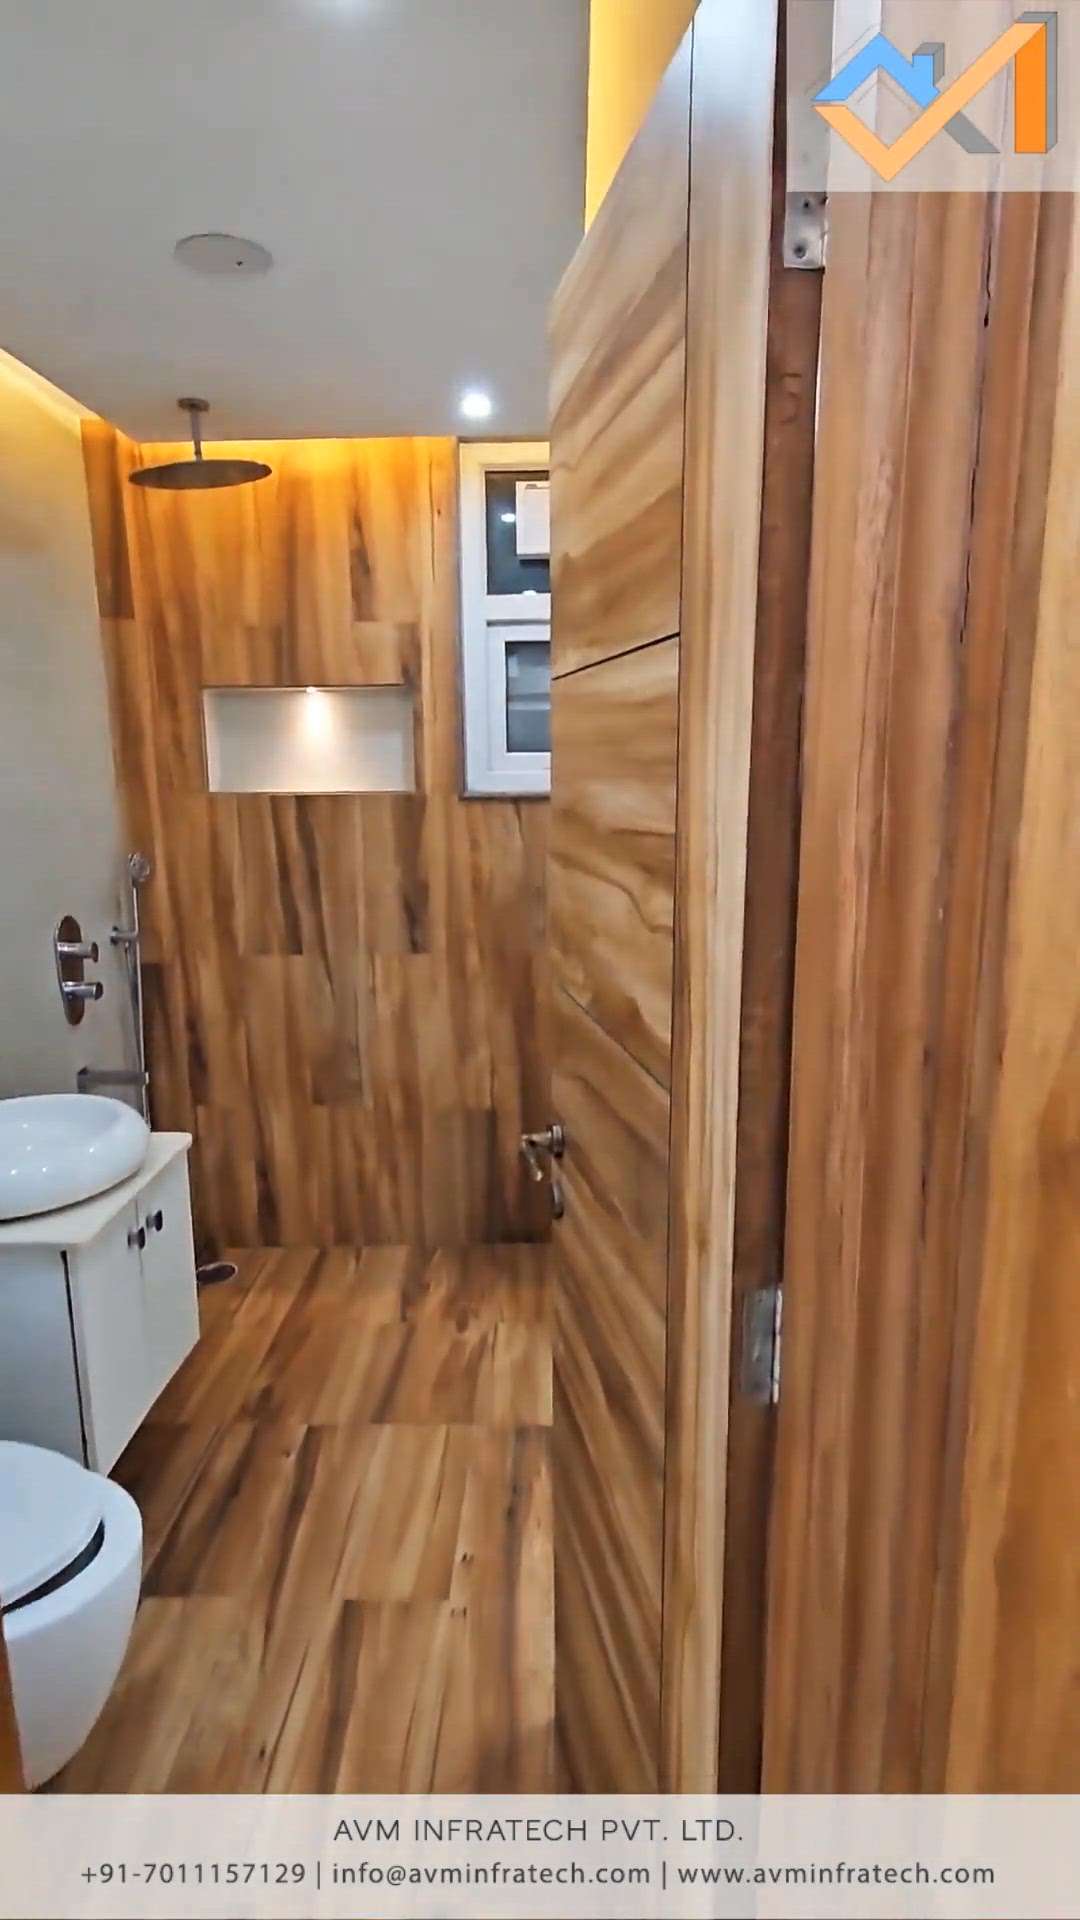 A connecting washroom which can be opened from outside and inside a room using a sliding door.


Follow us for more such amazing updates.
.
.
#washroom #bathroom #design #wash #room #bath #bathandbodyworks #bathroomdesign #bathroomdecor #toilet #washroomdesign #avminfratech #wooden #designtips #tiles #sliding #slidingdoors #vanity #vanitymirror #false #ceiling